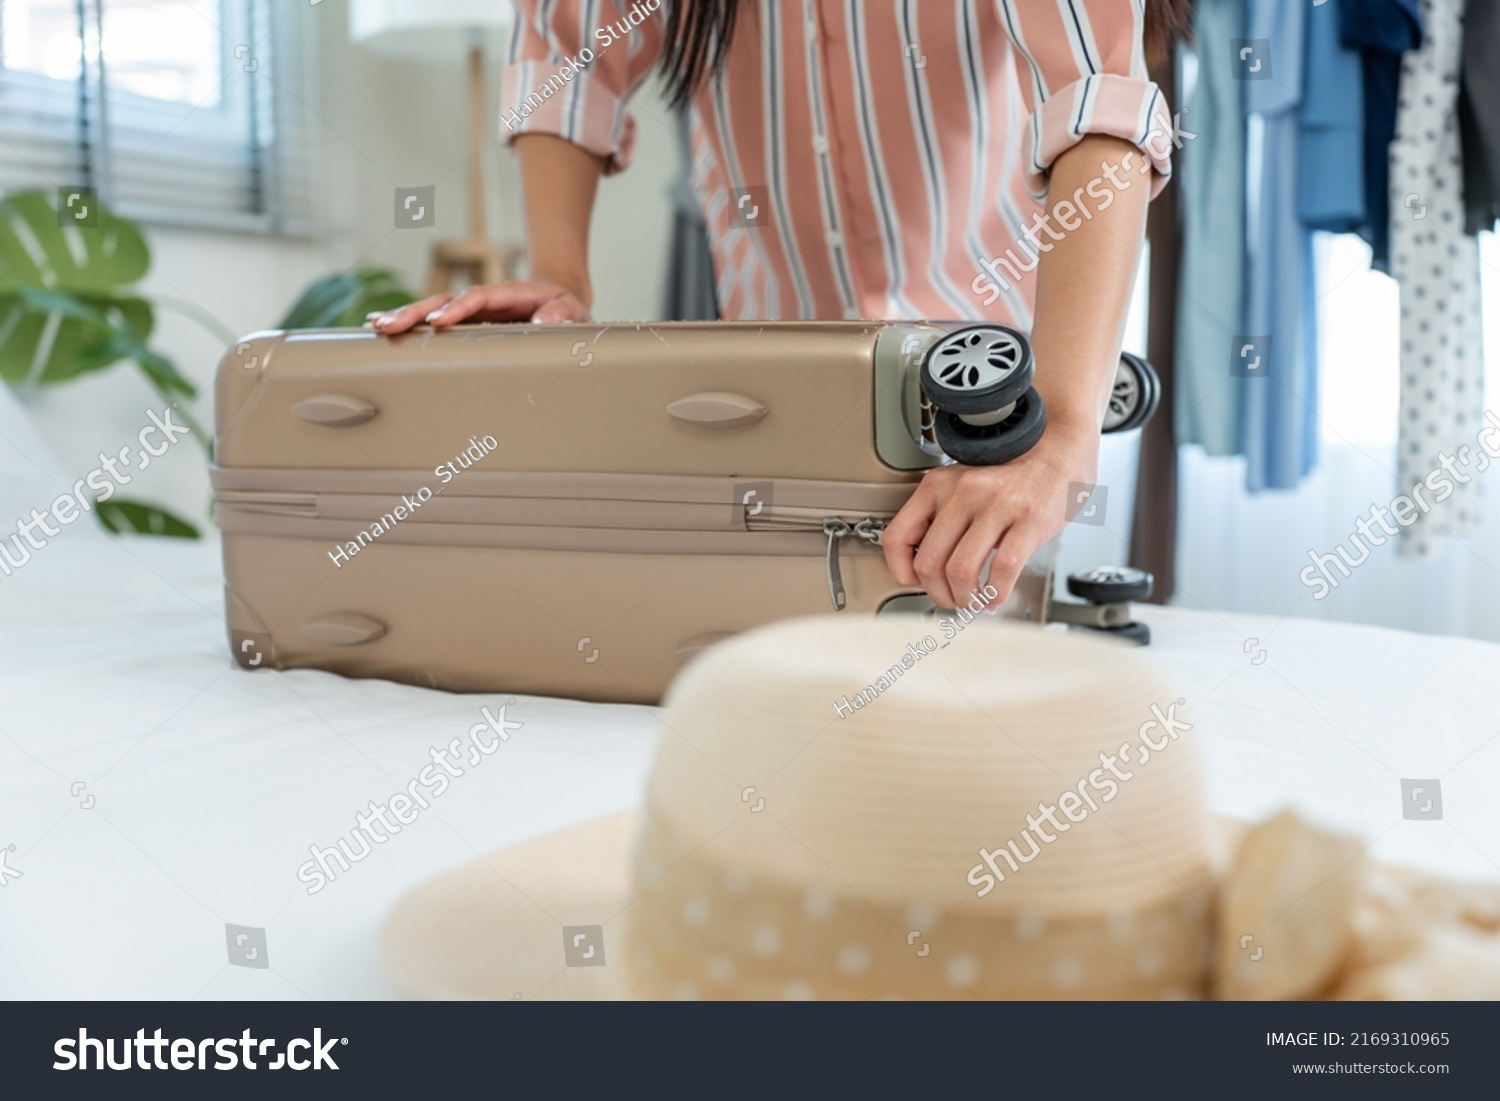 Close up hands of young woman preparing clothes and packing a suitcase. Attractive female tourist traveler feel happy and relax while preparing luggage on bed, ready to travel on holiday vacation trip #2169310965